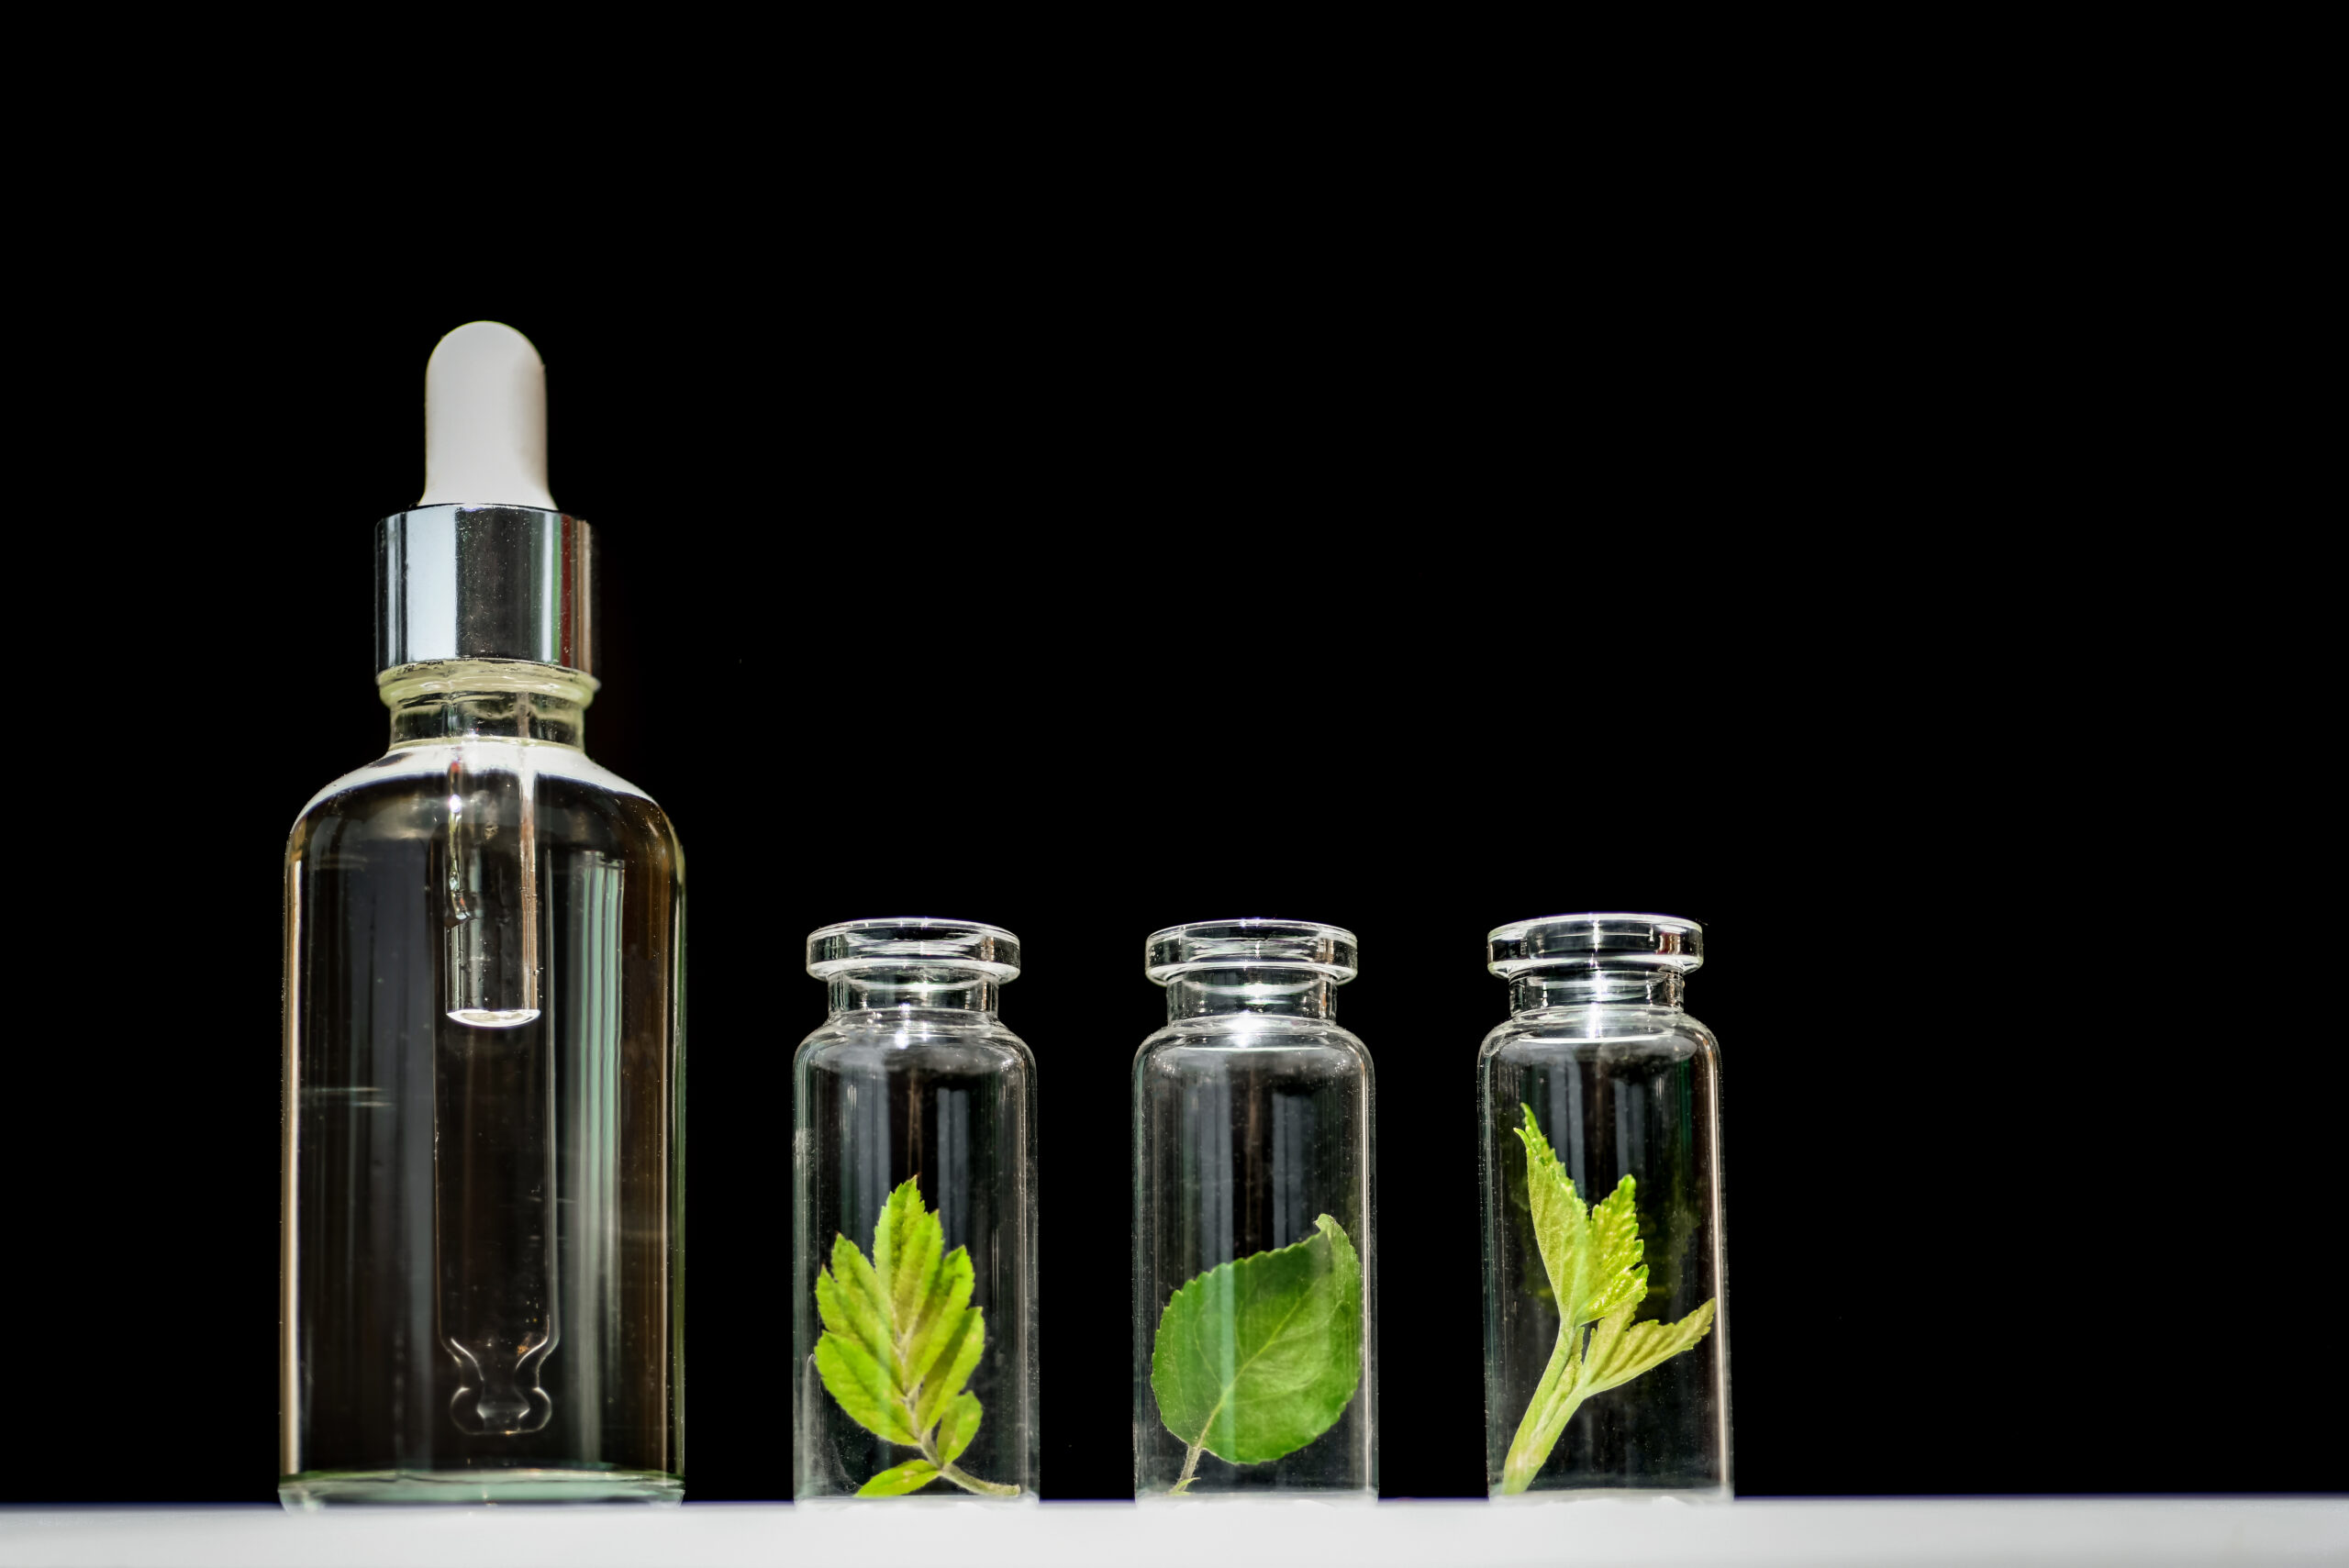 Homeopathic oil, serum and bottles with plants on blblack background